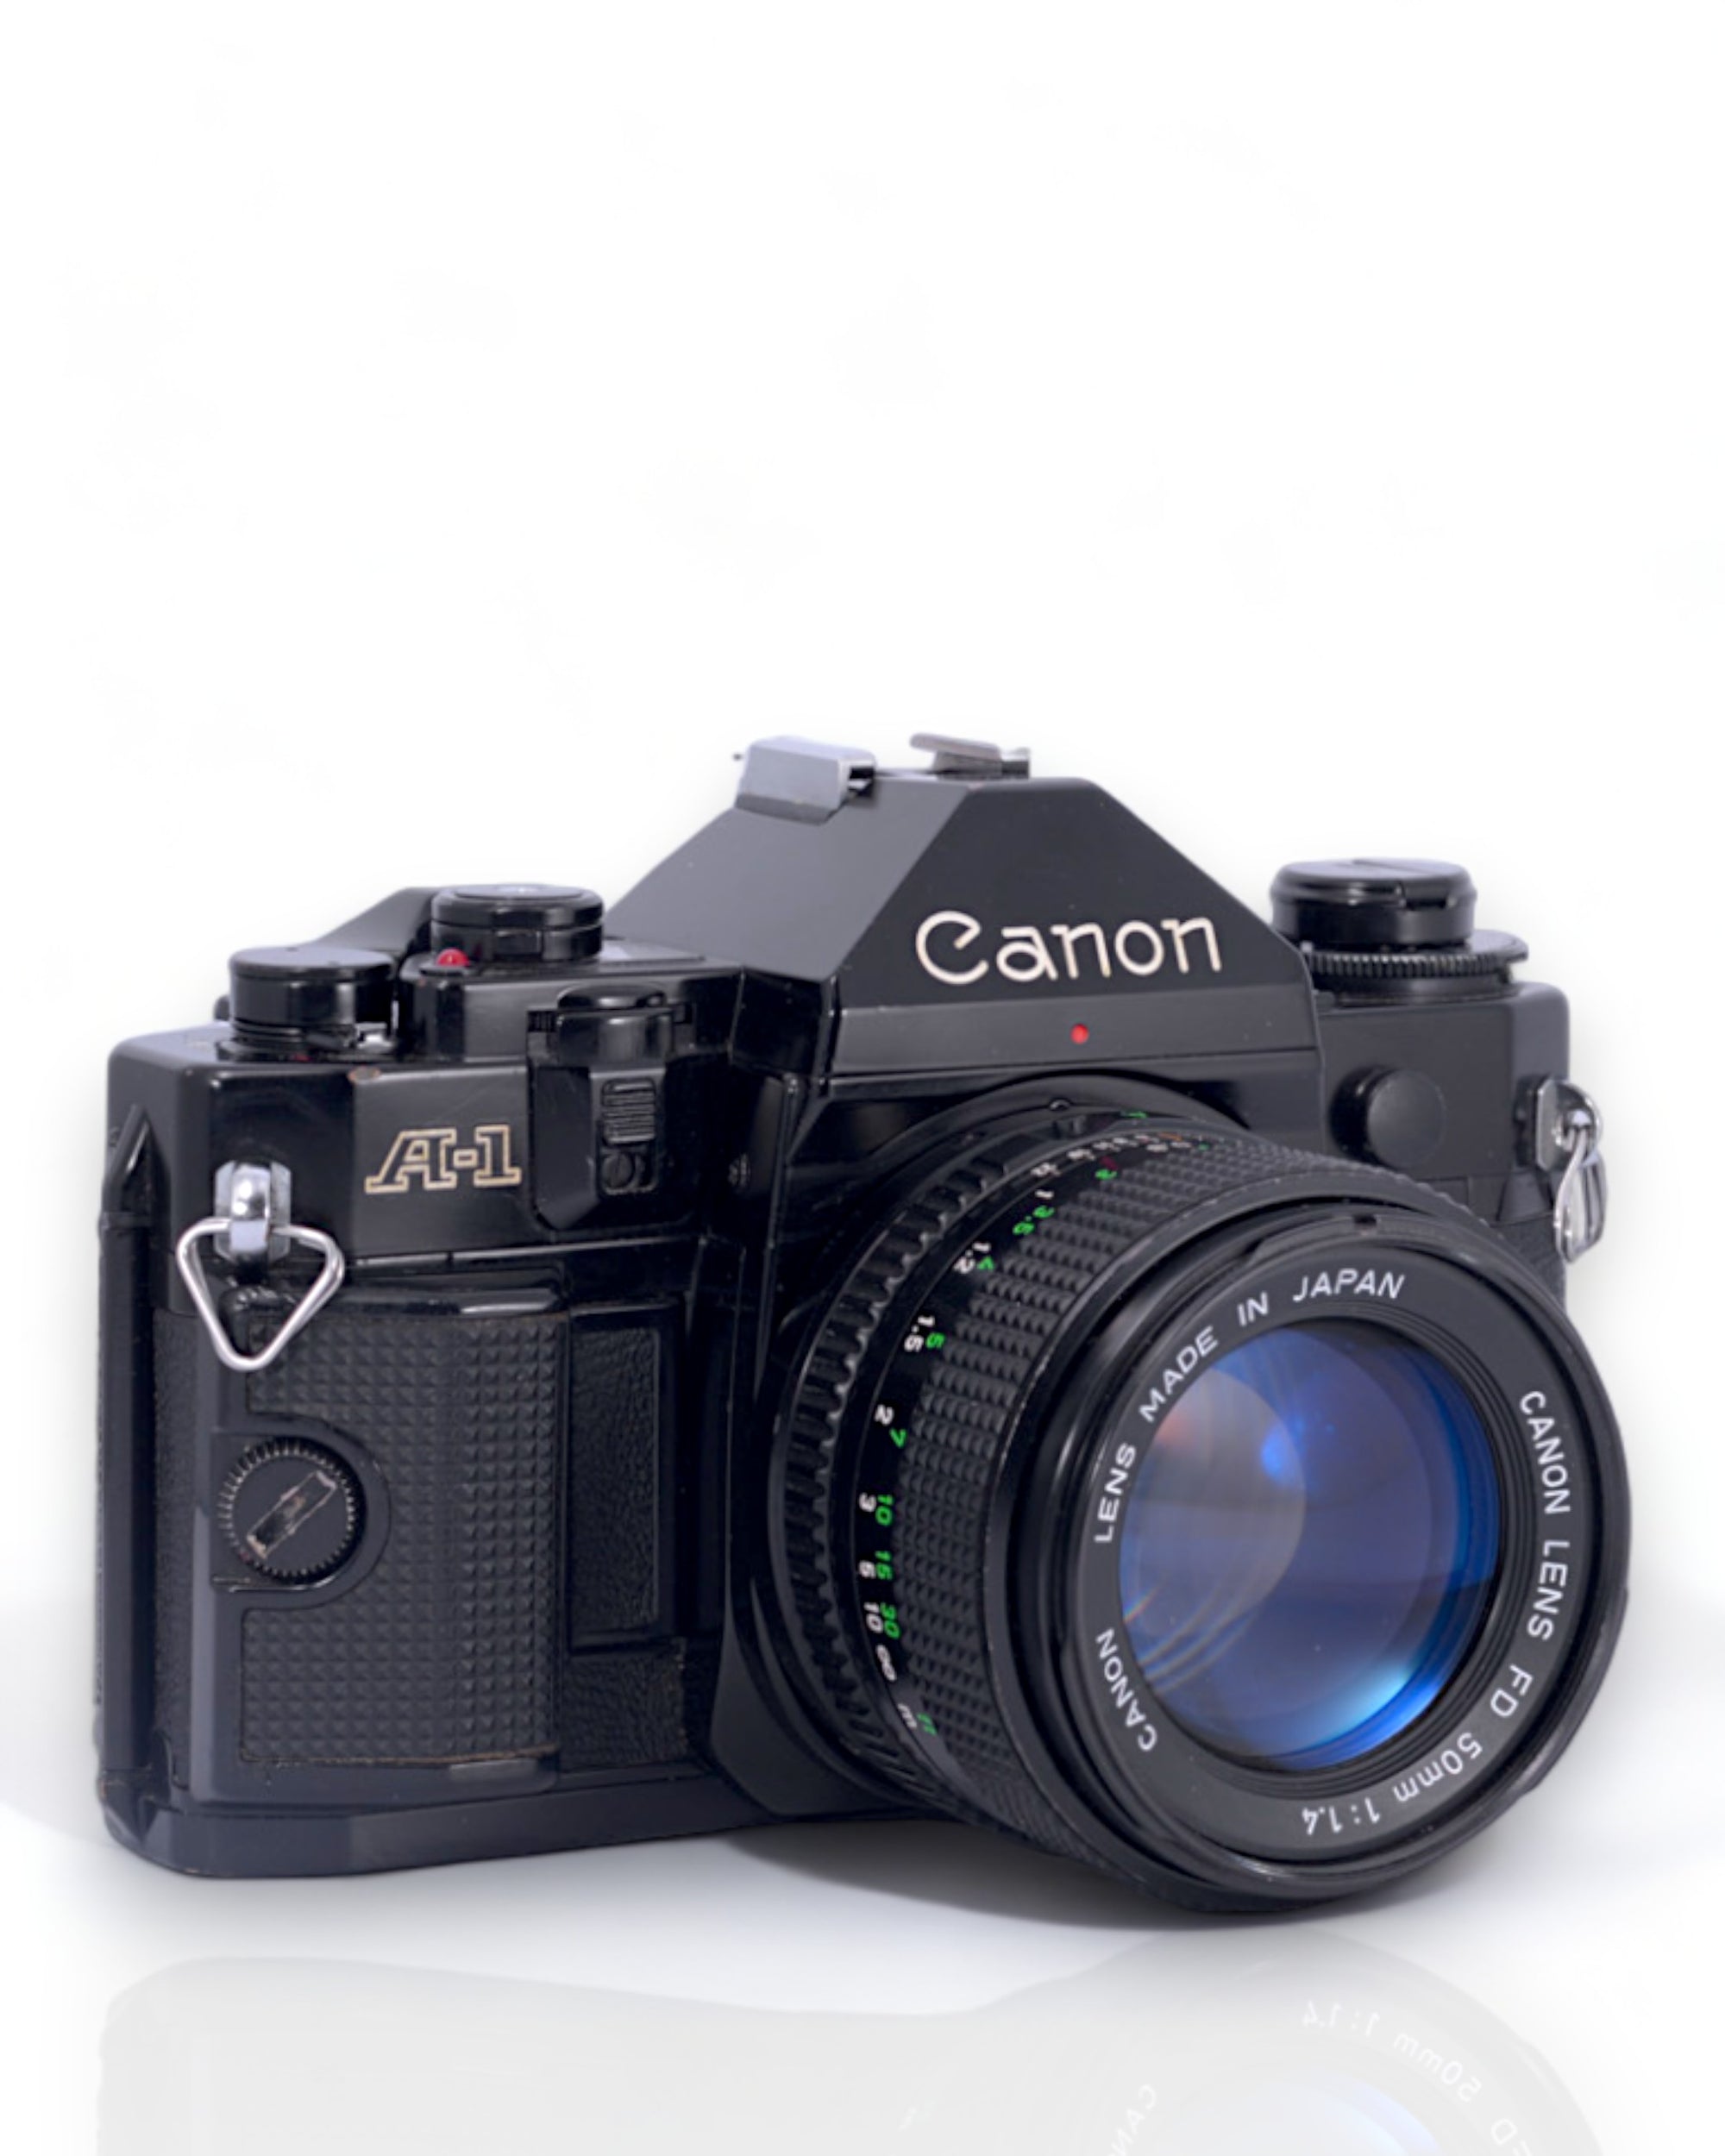 Canon A-1 Program 35mm SLR film camera with 50mm f1.4 lens